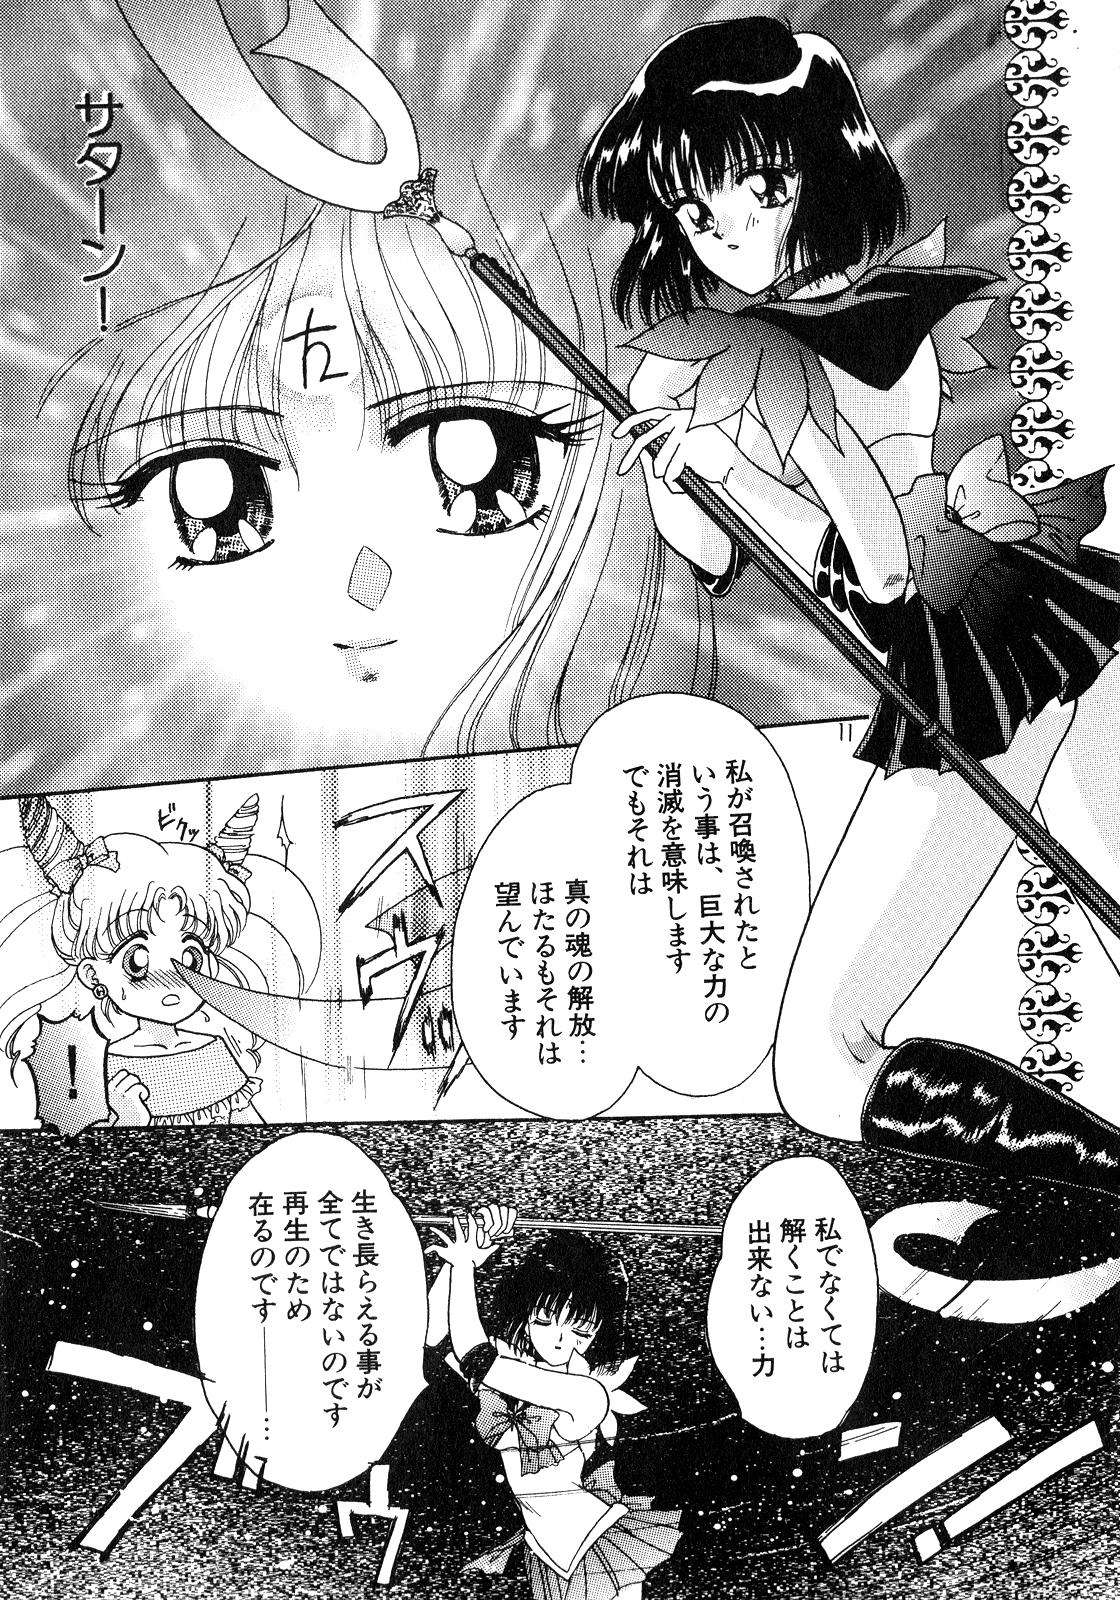 Missionary Porn Lunatic Party 8 - Sailor moon Dick Sucking - Page 10